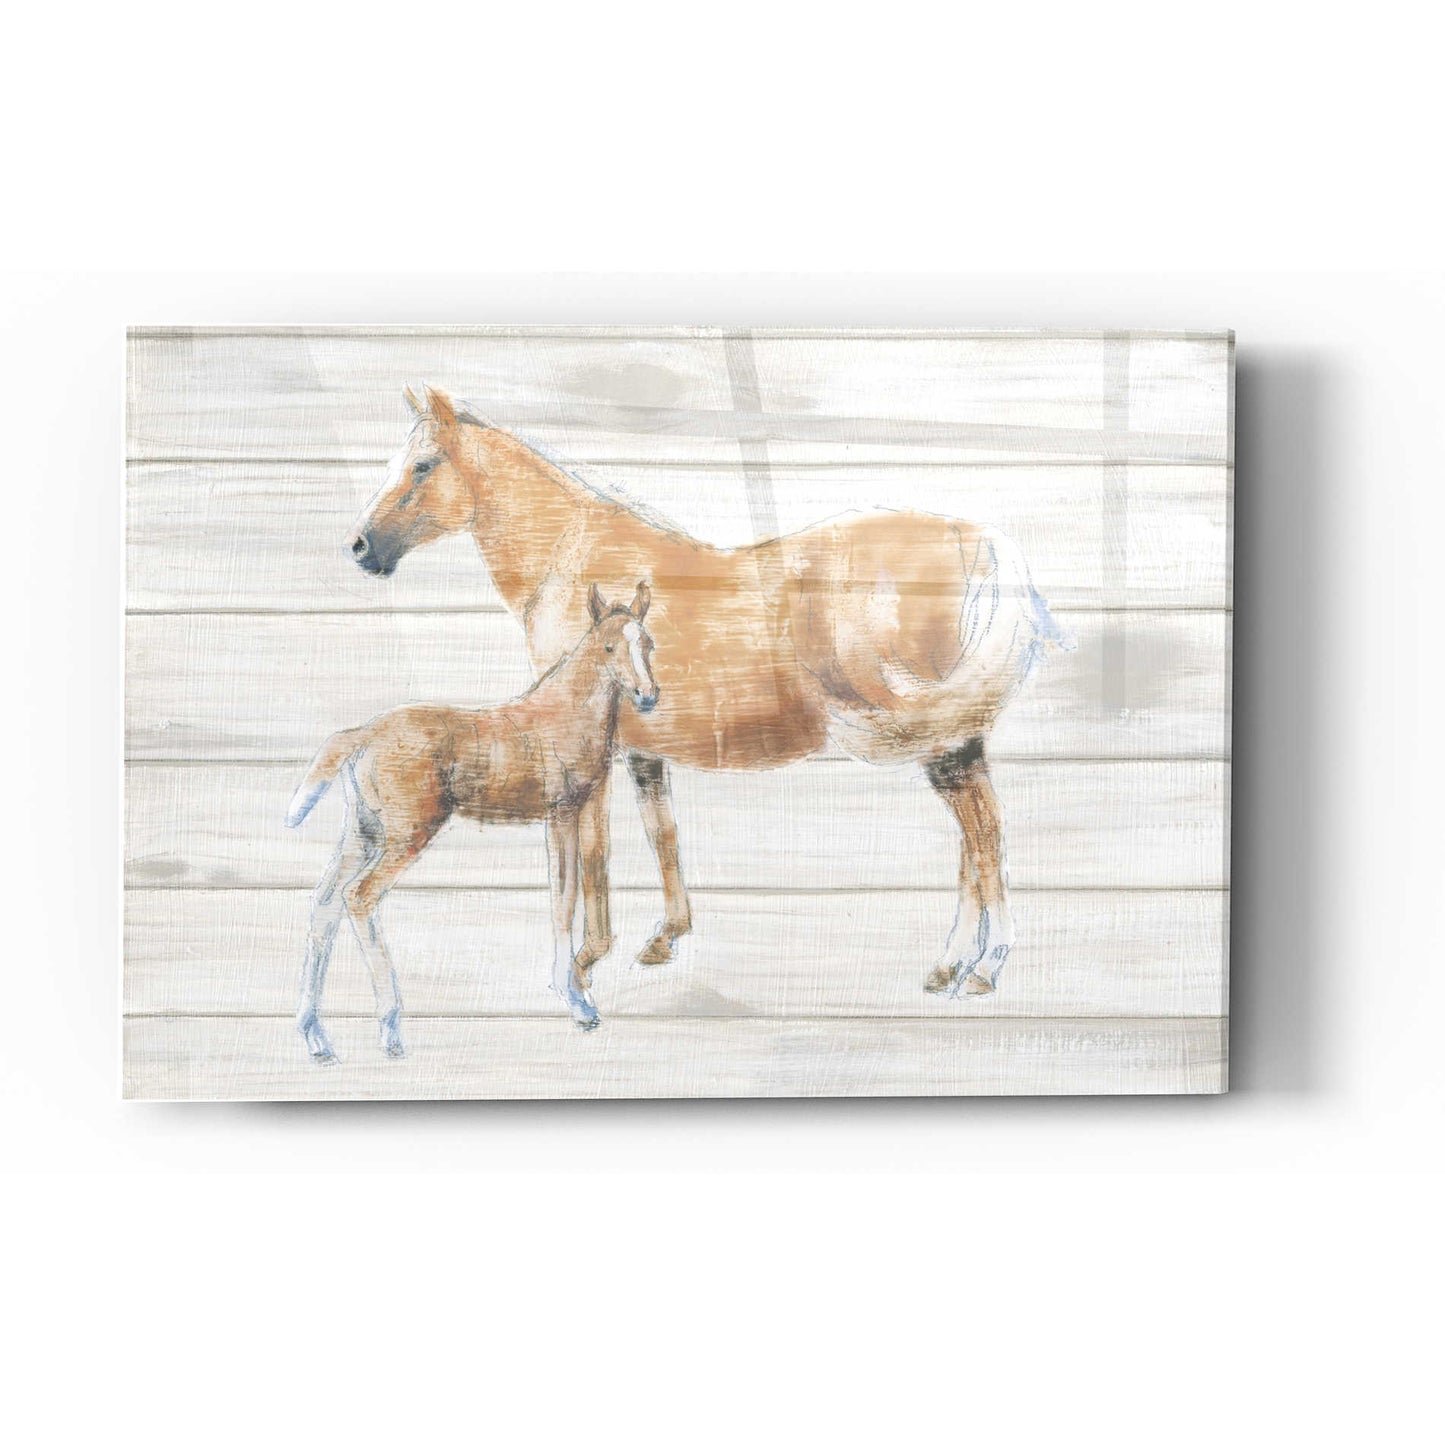 Epic Art 'Horse and Colt on Wood' by Emily Adams, Acrylic Glass Wall Art